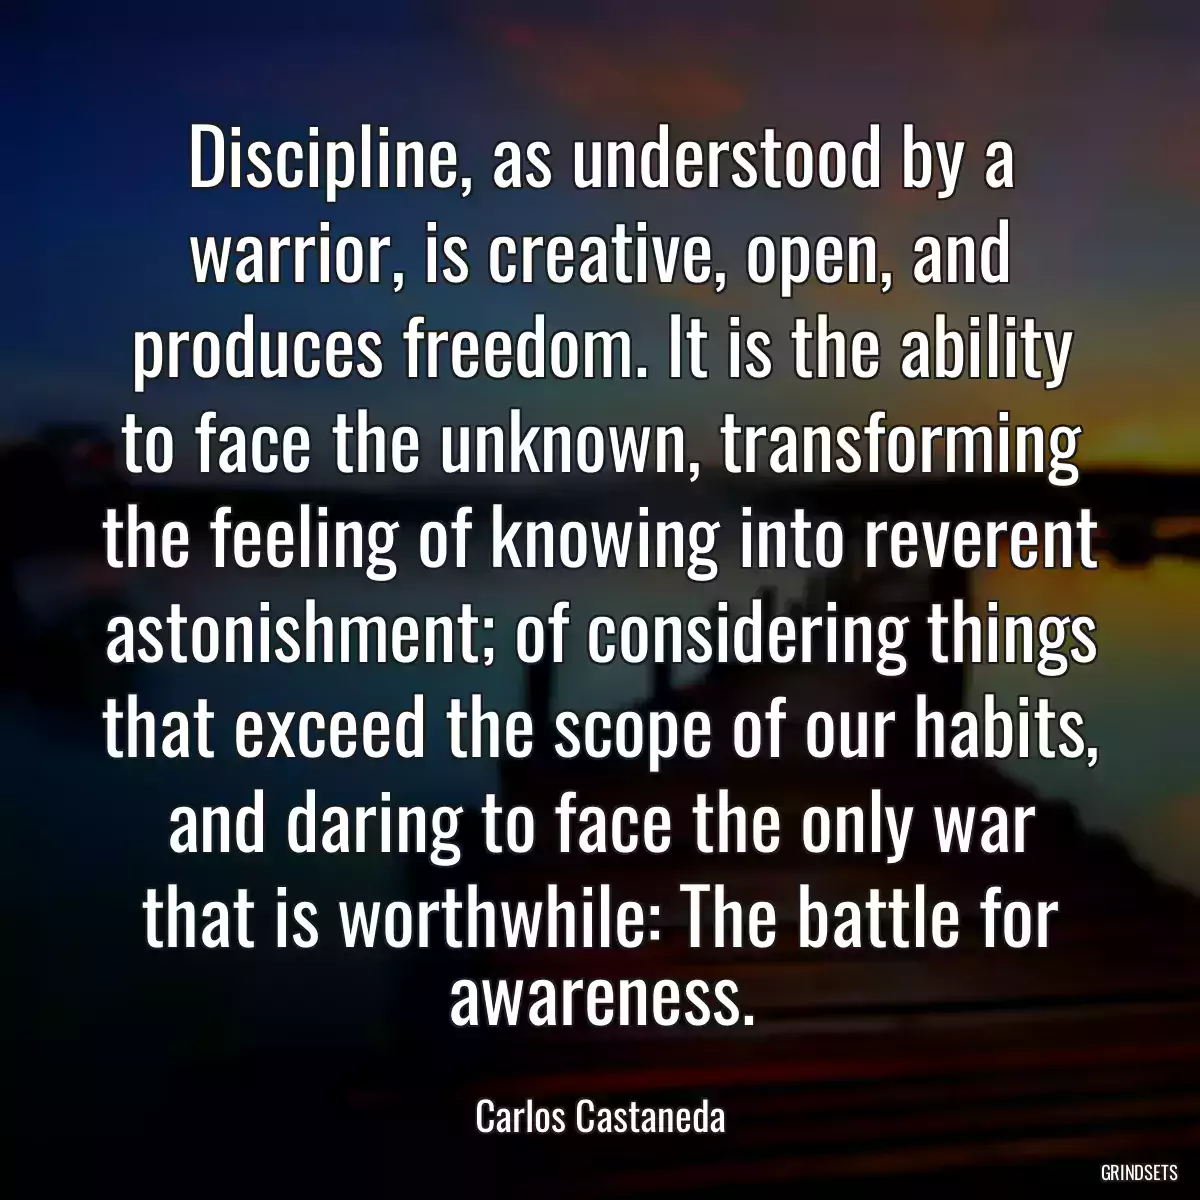 Discipline, as understood by a warrior, is creative, open, and produces freedom. It is the ability to face the unknown, transforming the feeling of knowing into reverent astonishment; of considering things that exceed the scope of our habits, and daring to face the only war that is worthwhile: The battle for awareness.